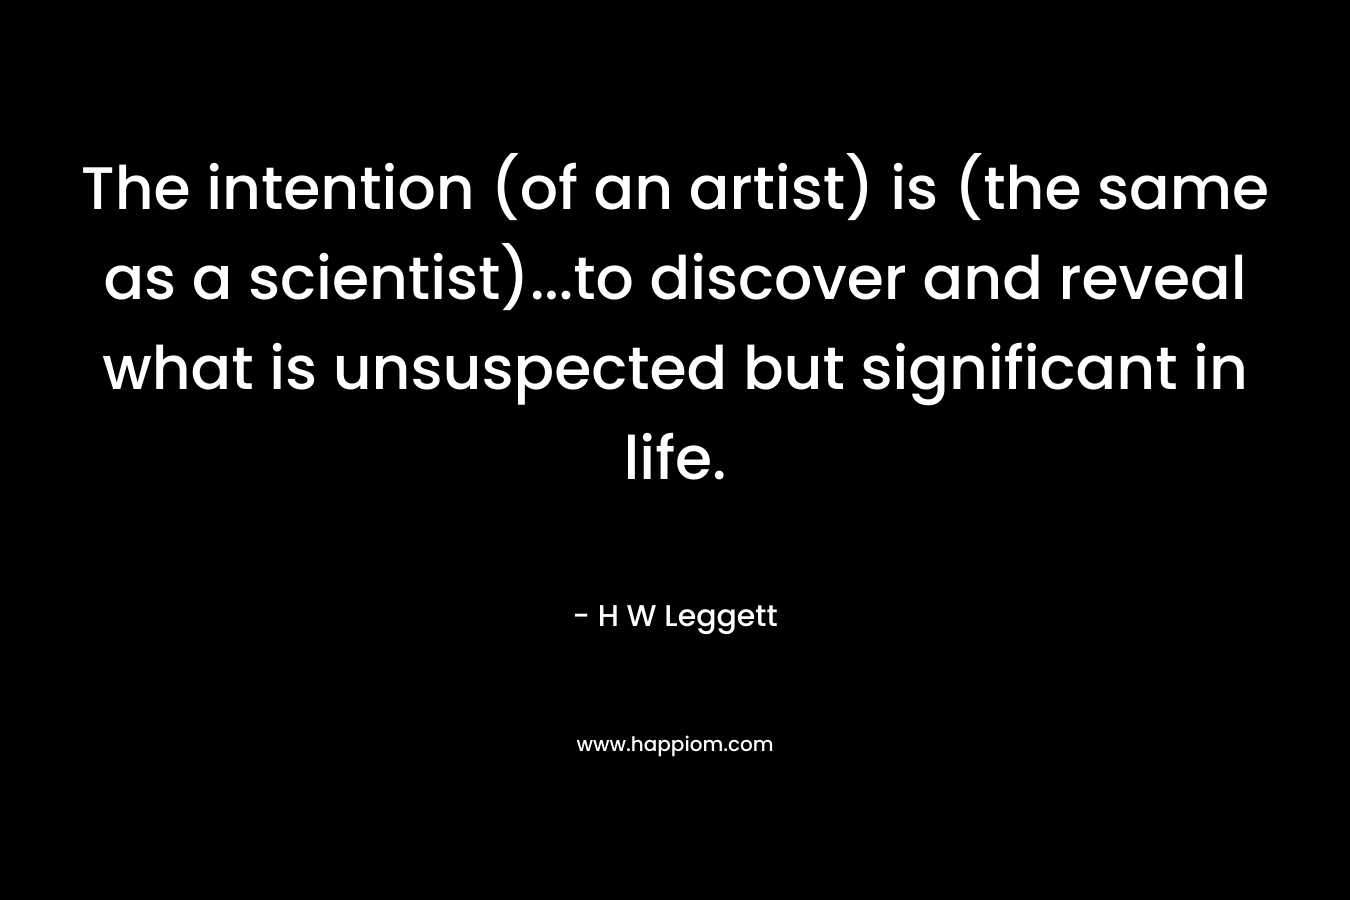 The intention (of an artist) is (the same as a scientist)…to discover and reveal what is unsuspected but significant in life. – H W Leggett